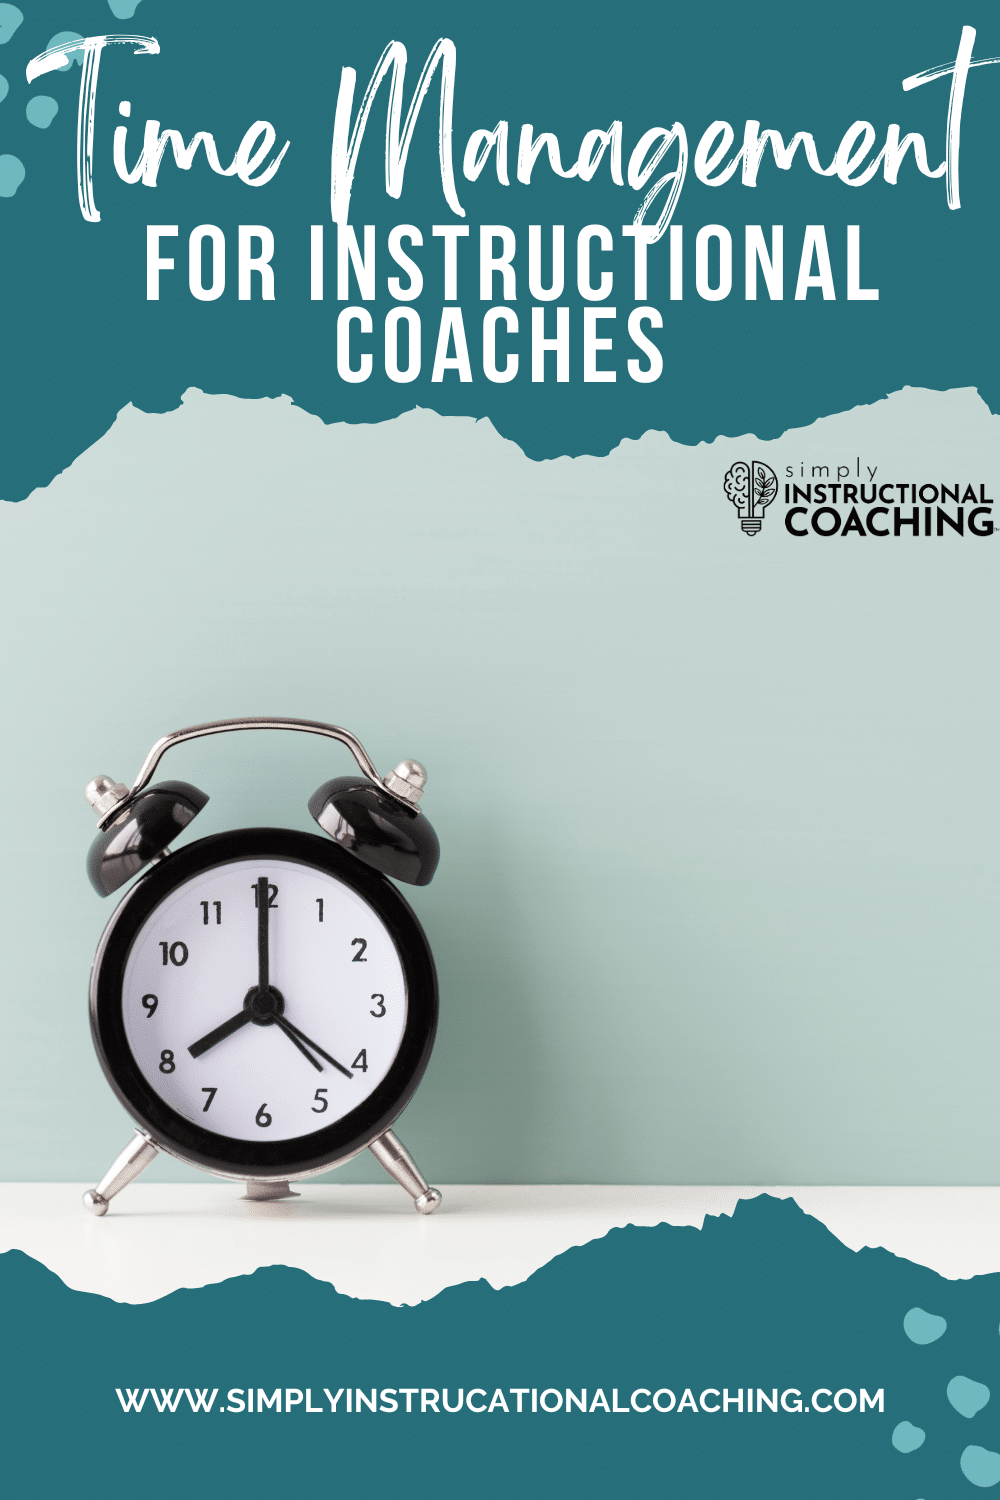 Time management for instructional coaches